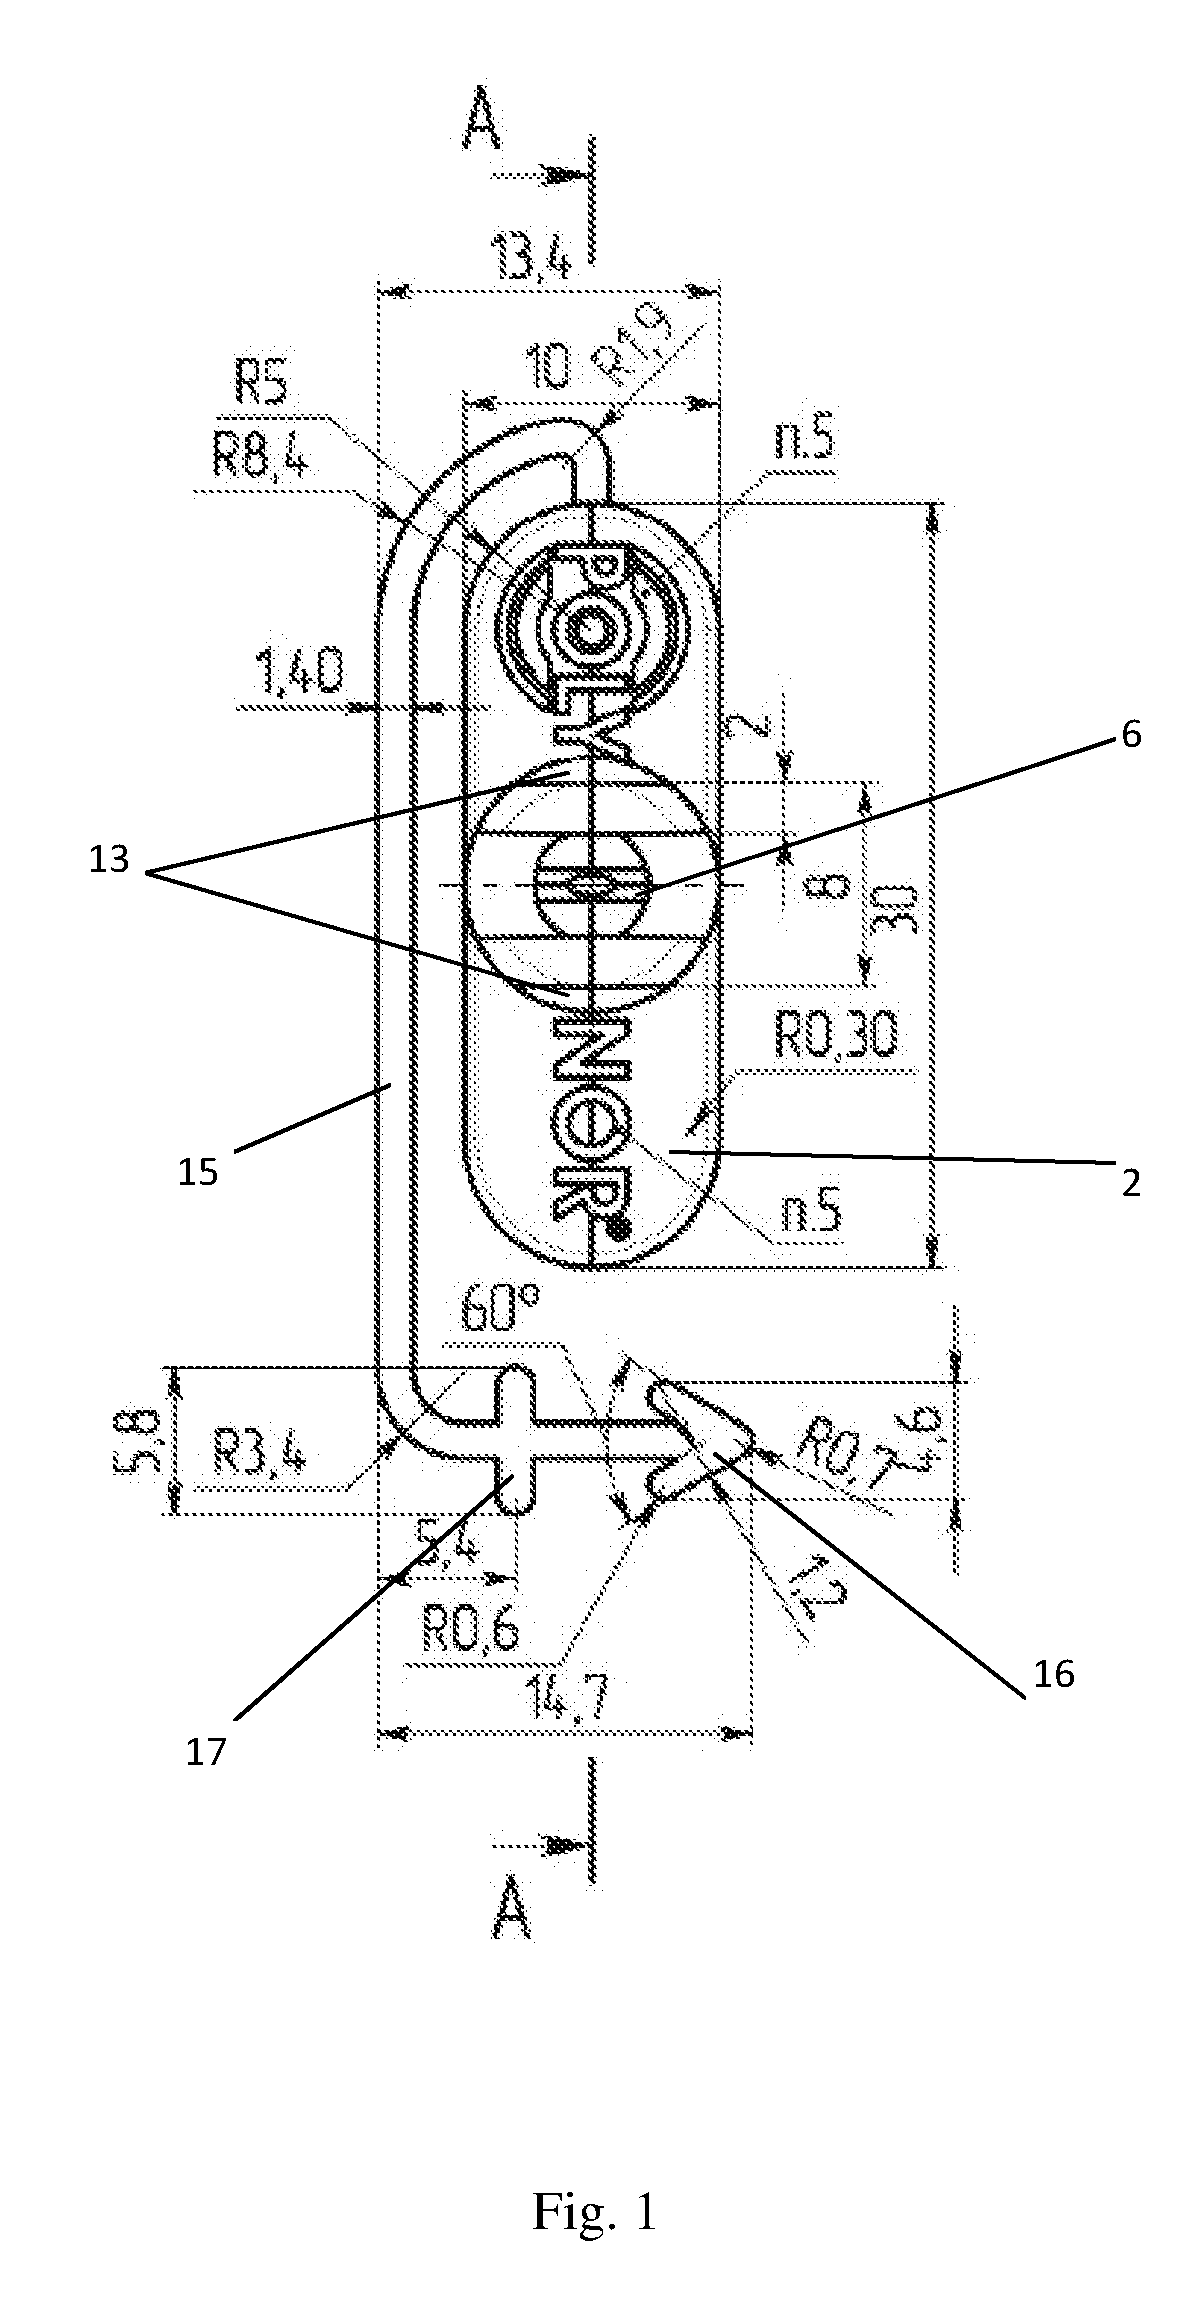 Device for Spraying Pressurized Material